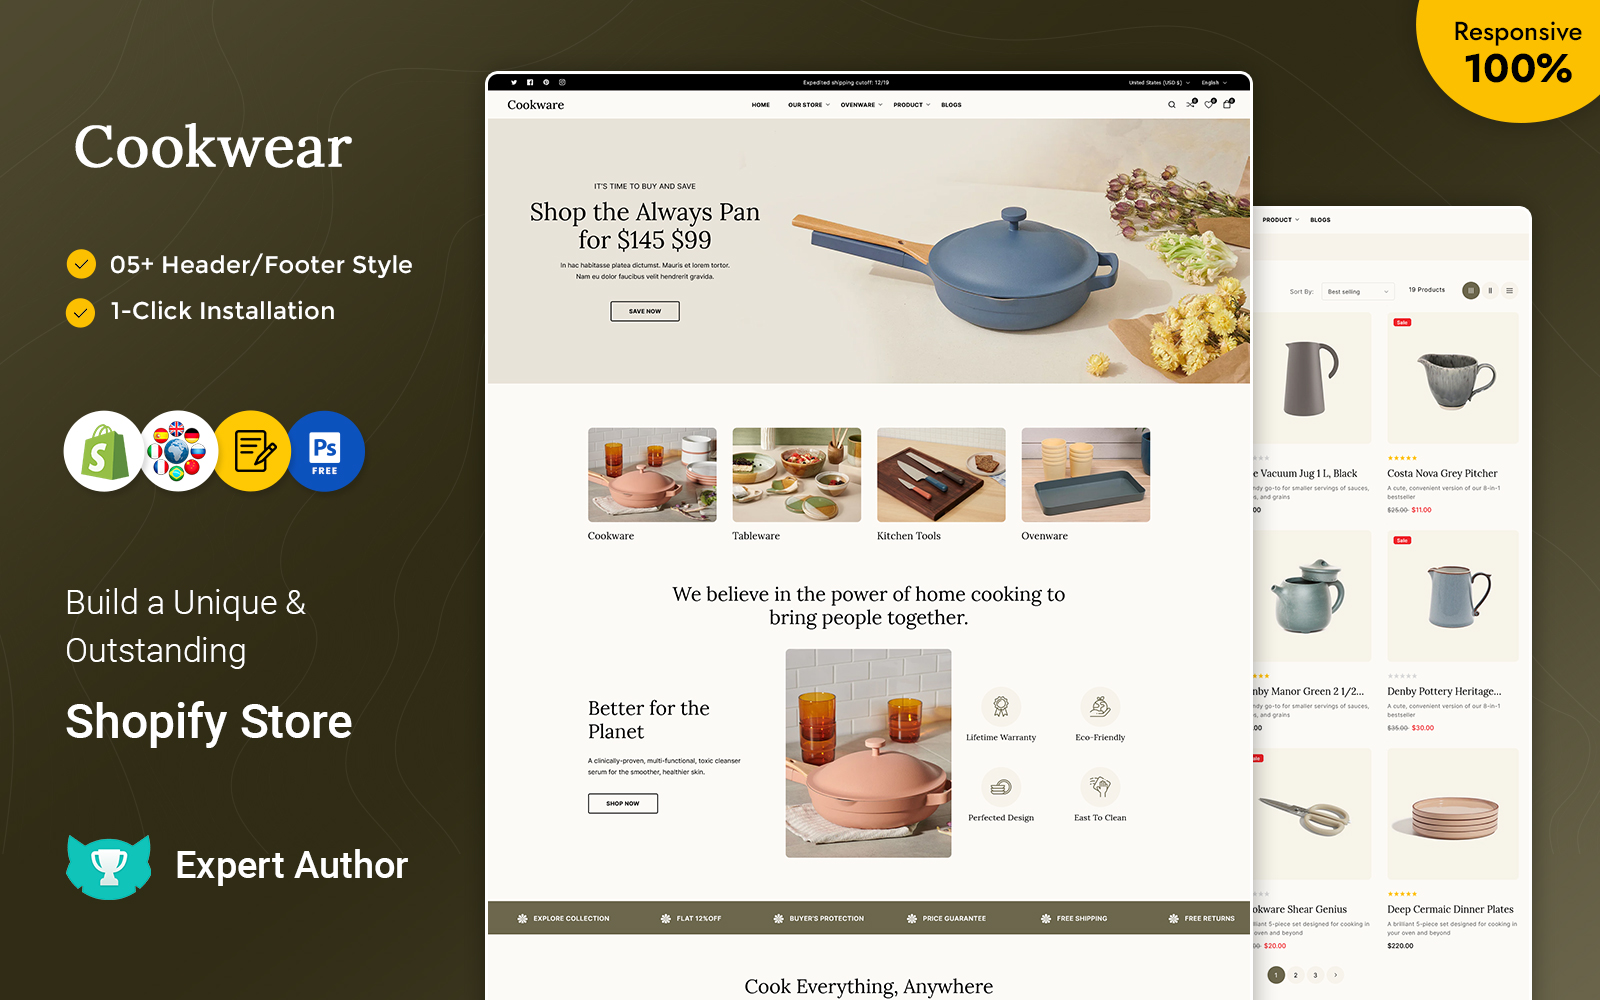 Cookware - Appliances, Kitchen and Crockery Shopify Multipurpose Responsive Theme